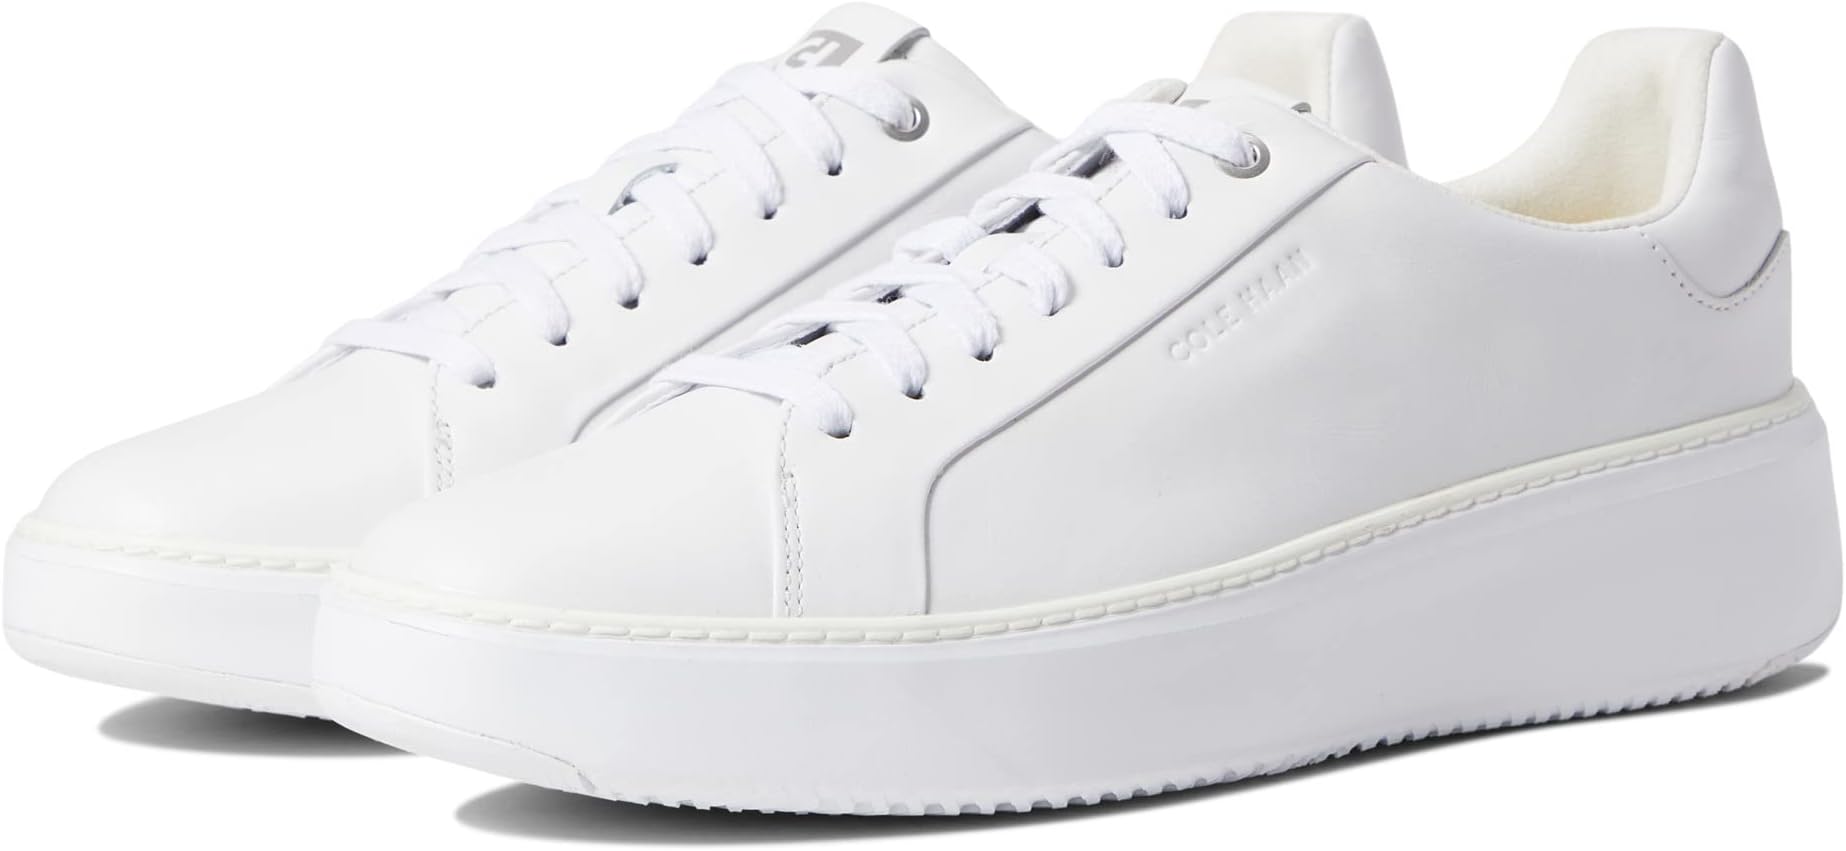 Кроссовки Grandpro Topspin Sneaker Cole Haan, цвет White/White